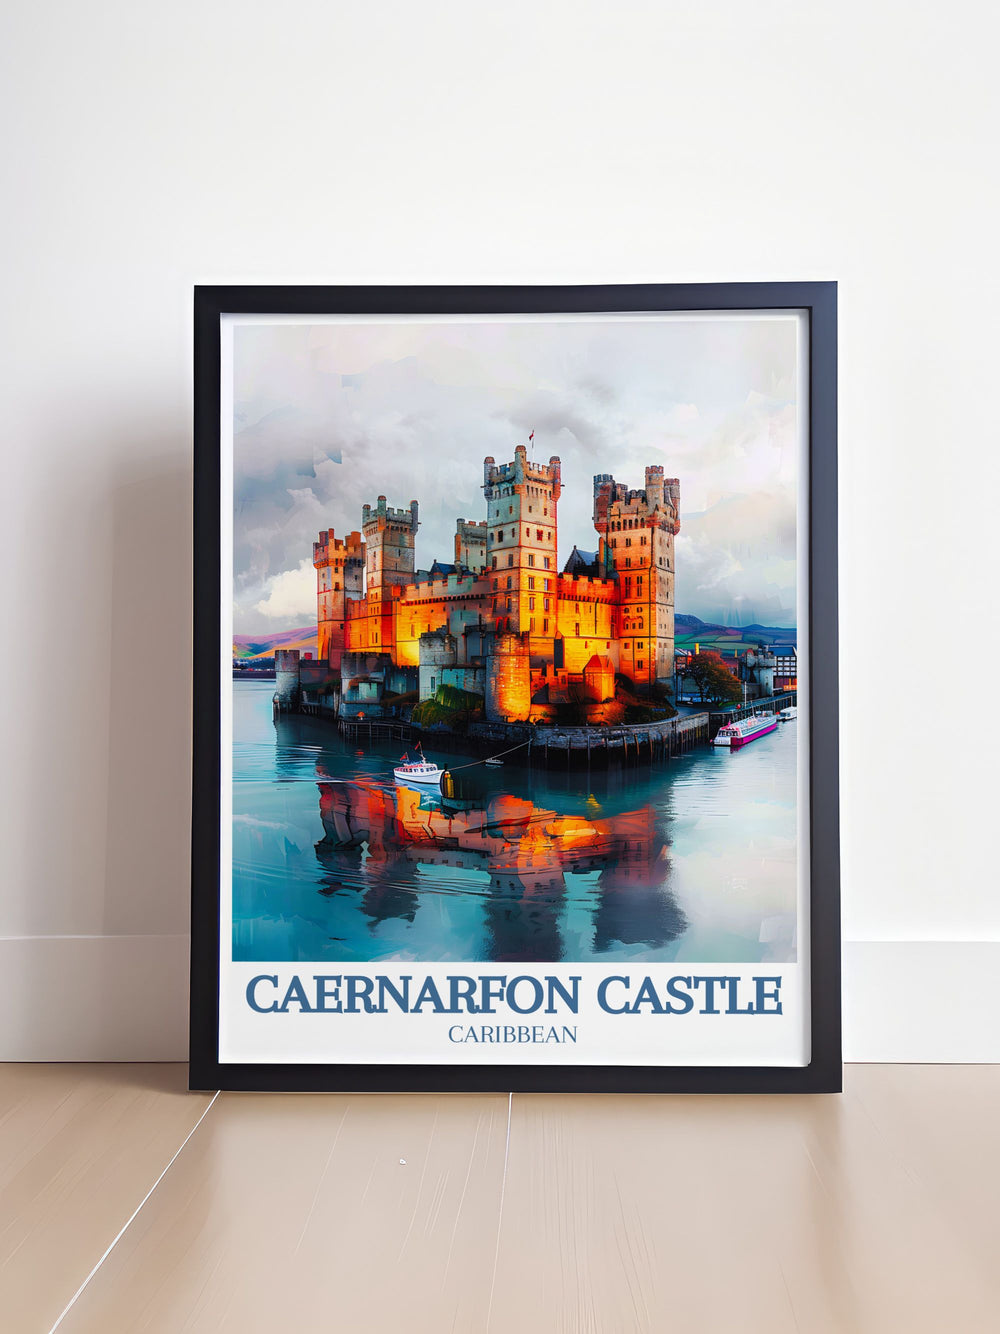 Stunning Caernarfon Castle print highlighting the majestic fortress, the scenic Beddgelert Village, and the adventurous Snowdon Ranger path, ideal for history enthusiasts and nature lovers.